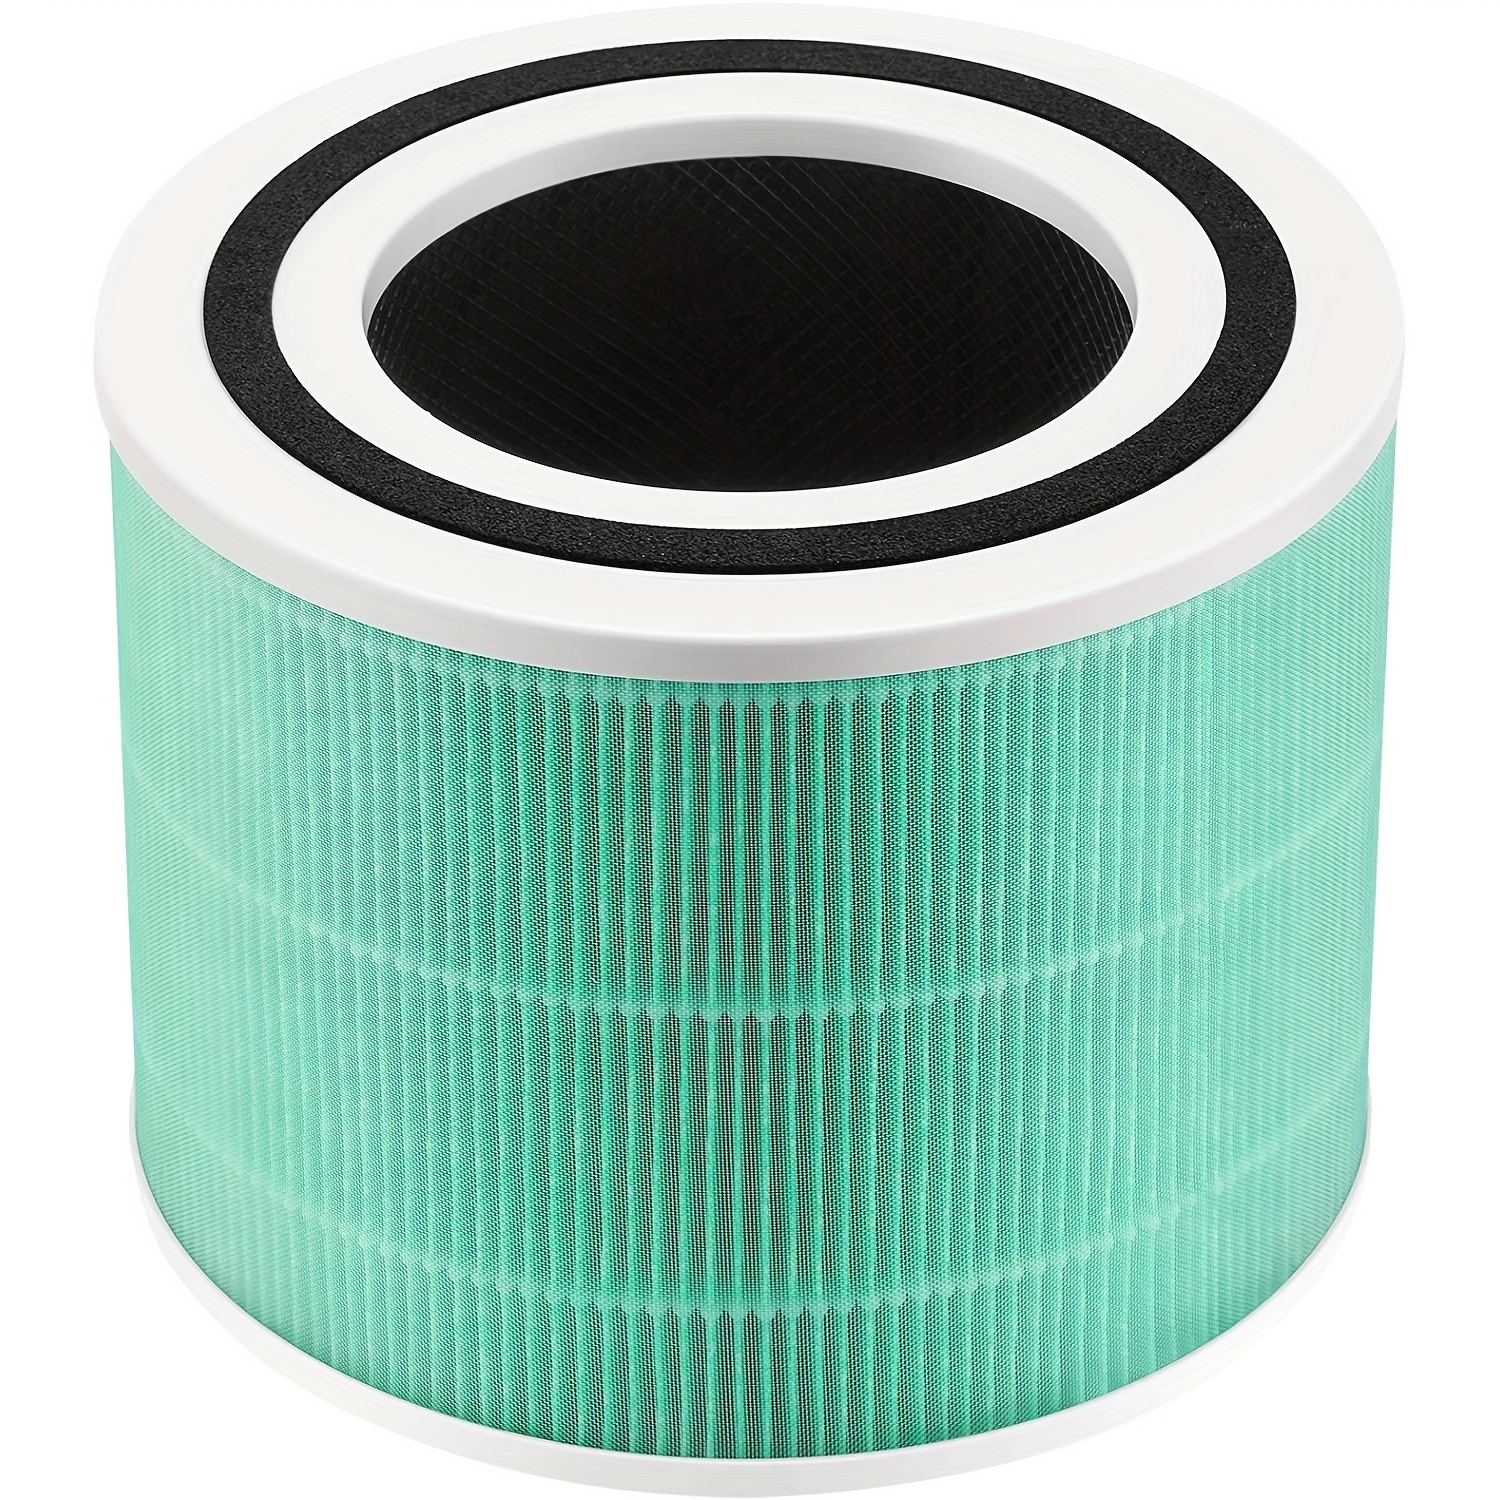 Air Purifier Filter H13 True Hepa And Activated Carbon Filter Replacement  For Levoit Lv-pur131, Lv-pur131-rf, Lv-pur131s - Air Purifiers - AliExpress